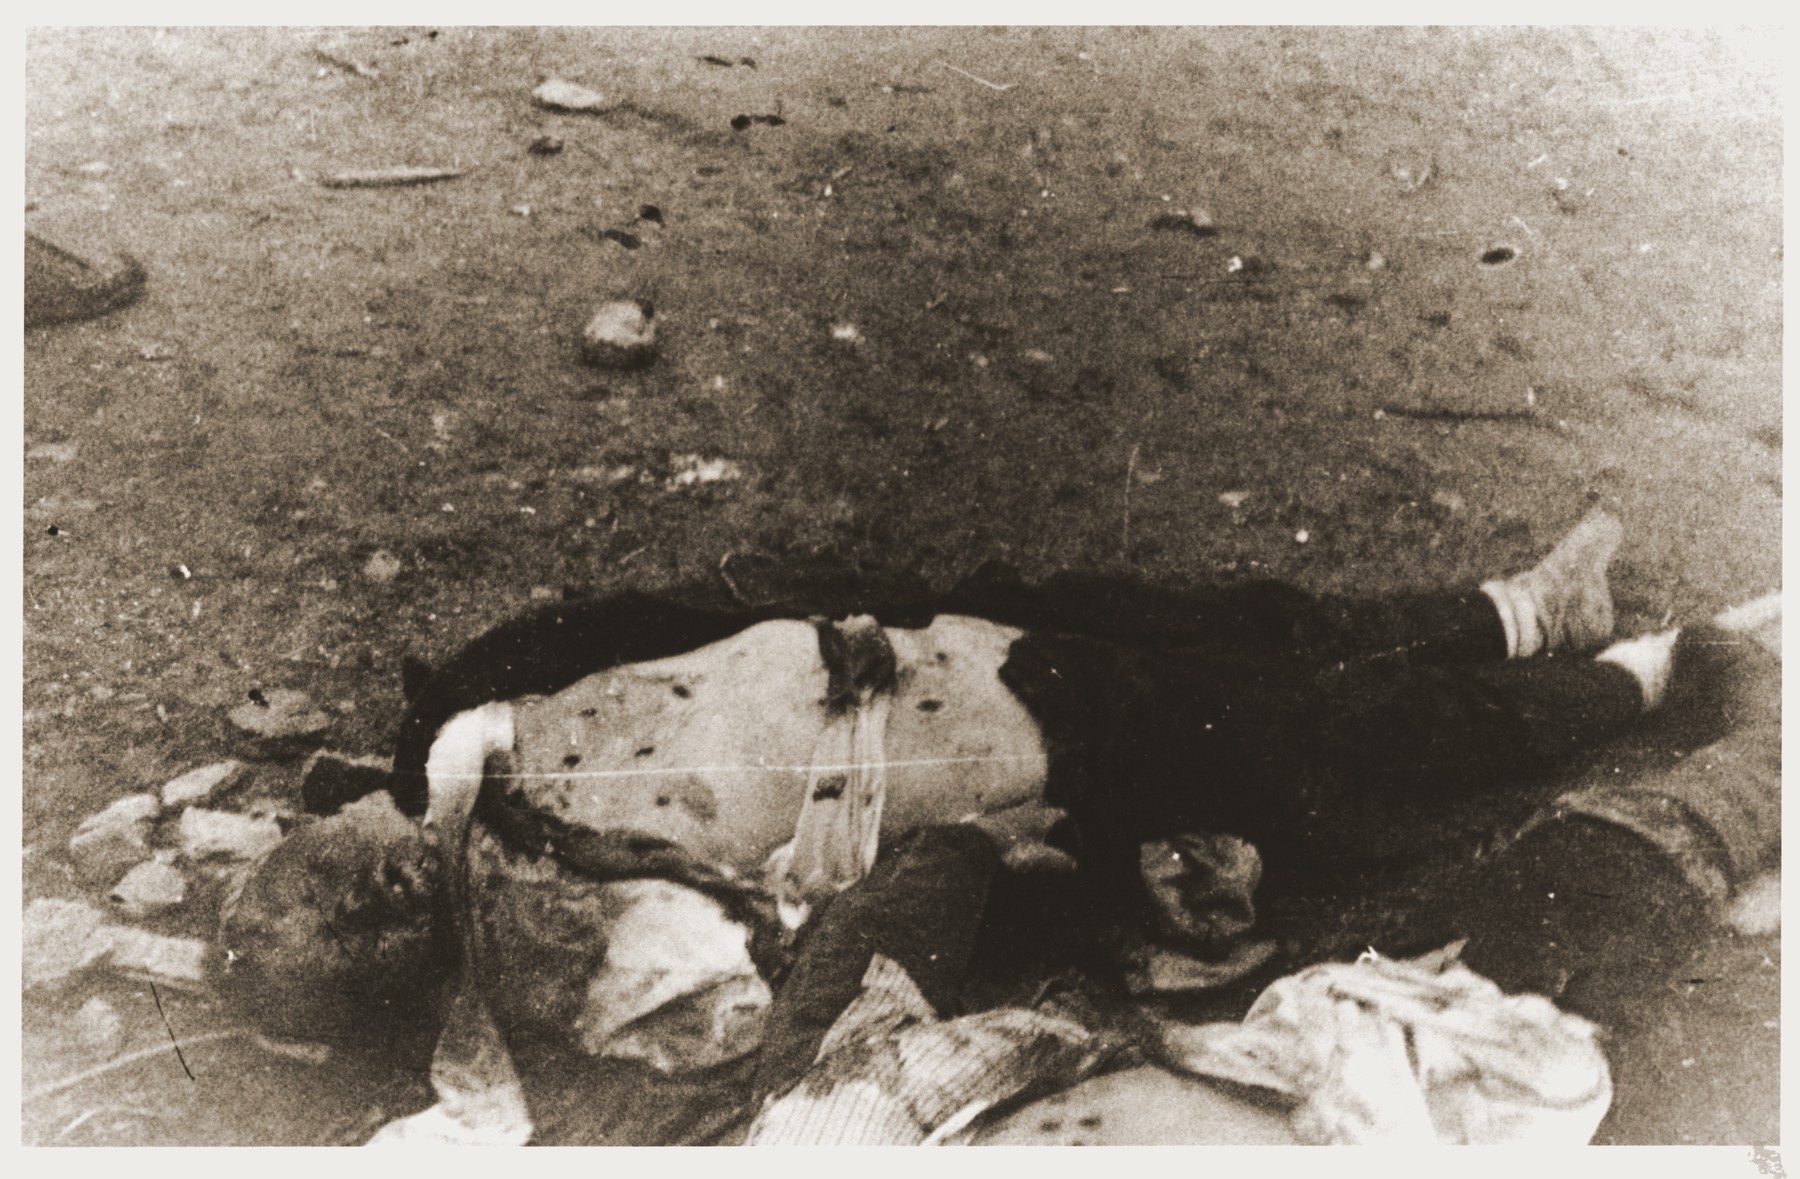 Corpses in a death train in Dachau. - Collections Search 